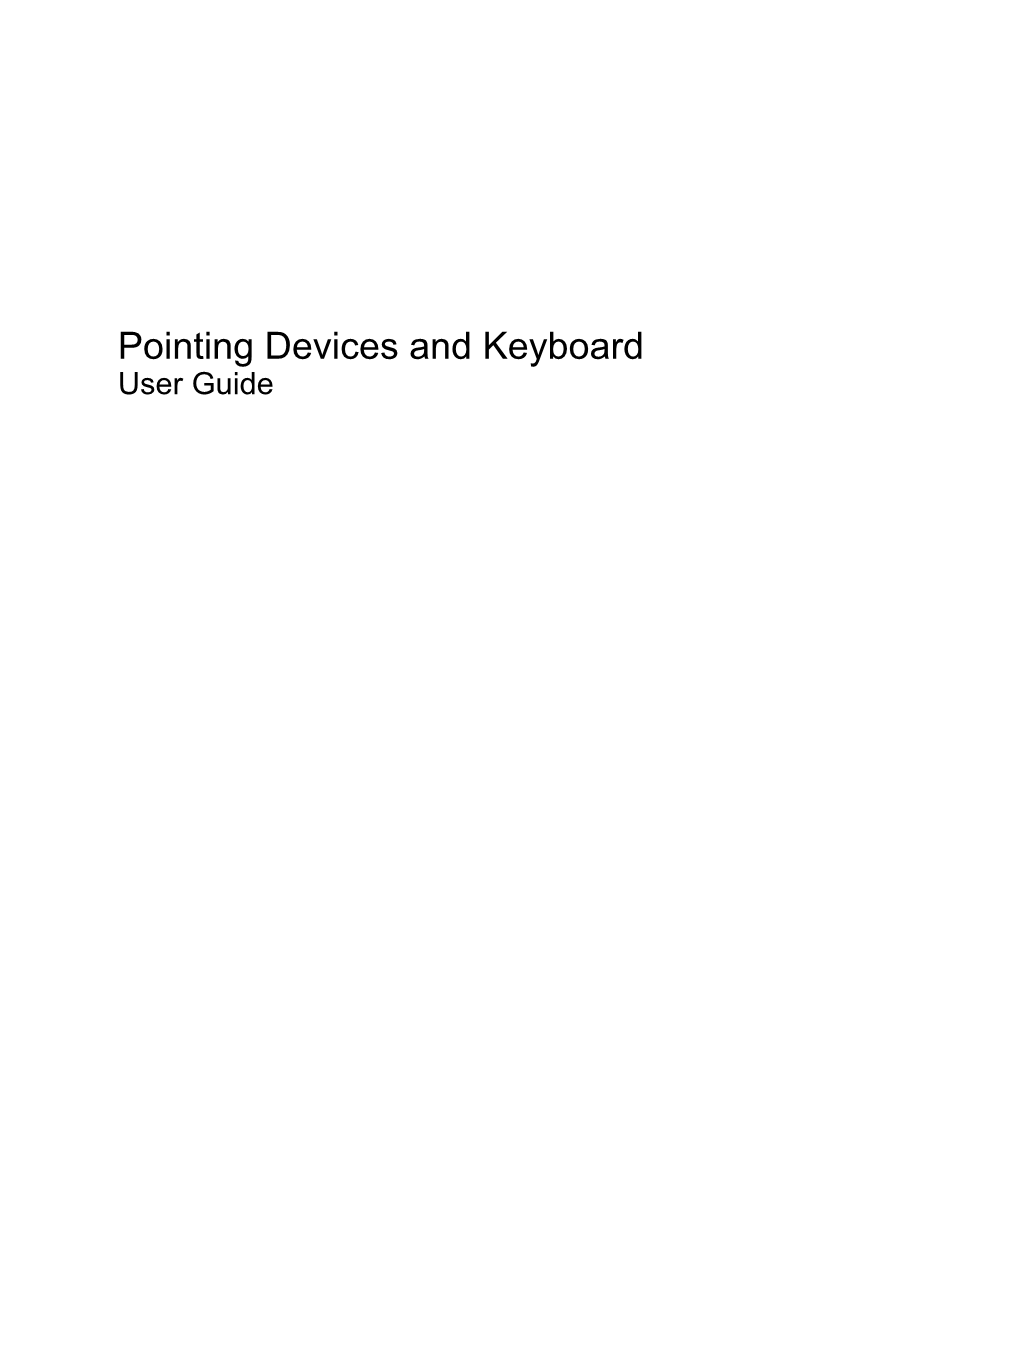 Pointing Devices and Keyboard User Guide © Copyright 2009 Hewlett-Packard Development Company, L.P